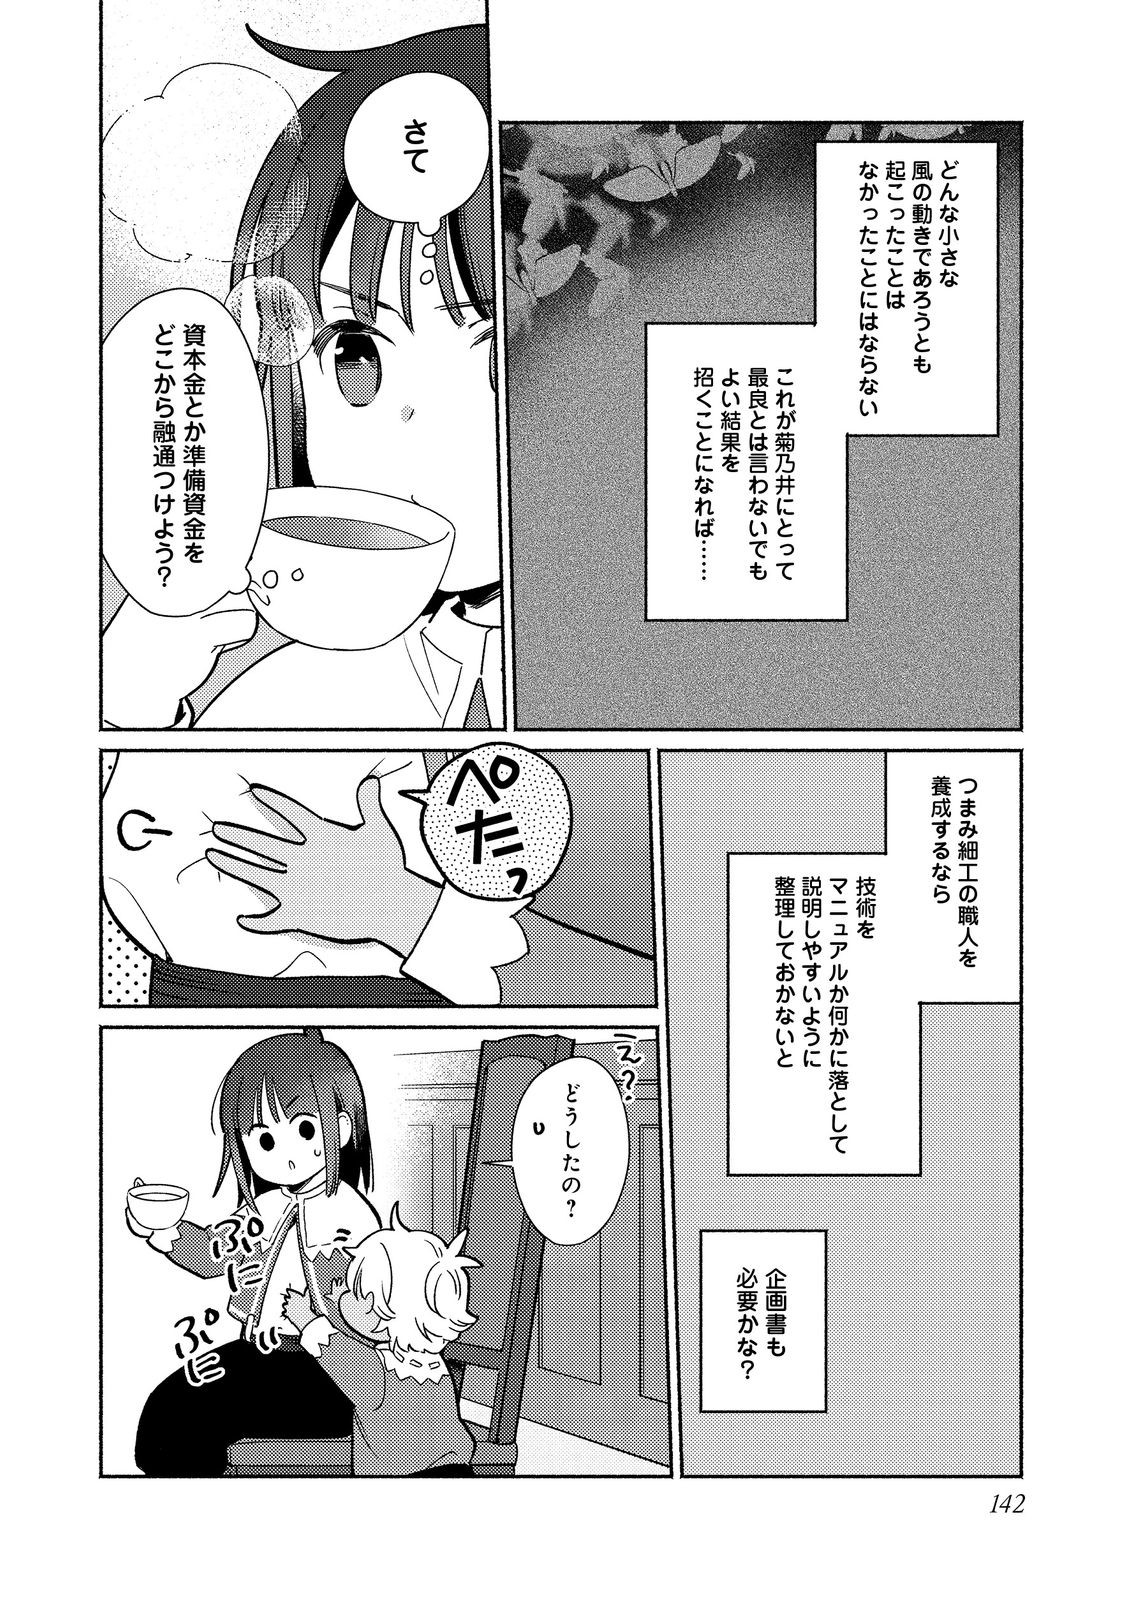 I’m the White Pig Nobleman 第20.1話 - Page 16